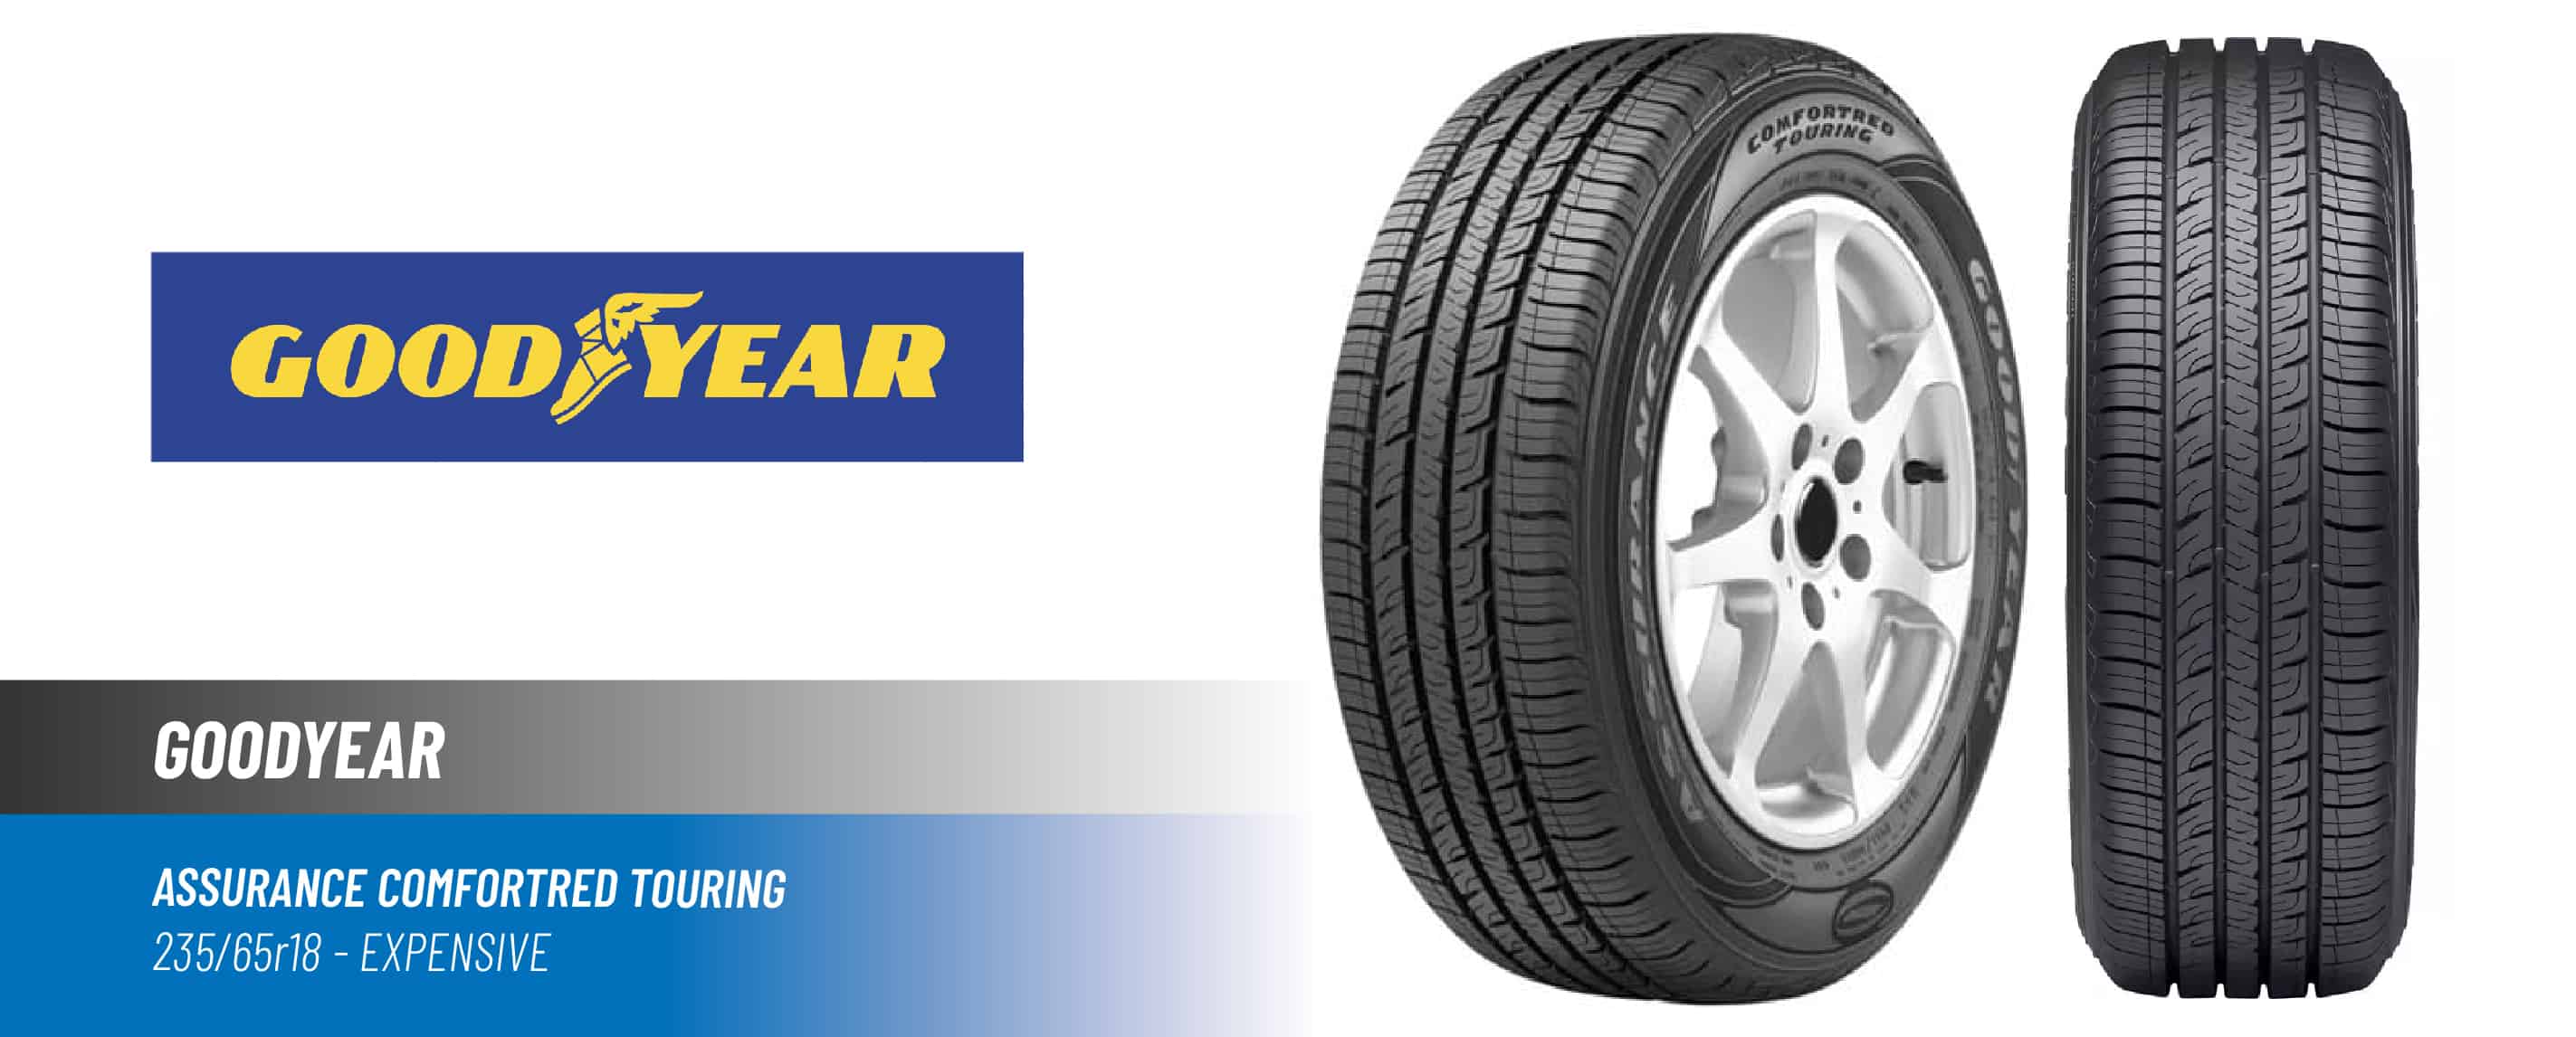 Top#4 High Price: Goodyear Assurance ComforTred Touring –best 235/65 R18